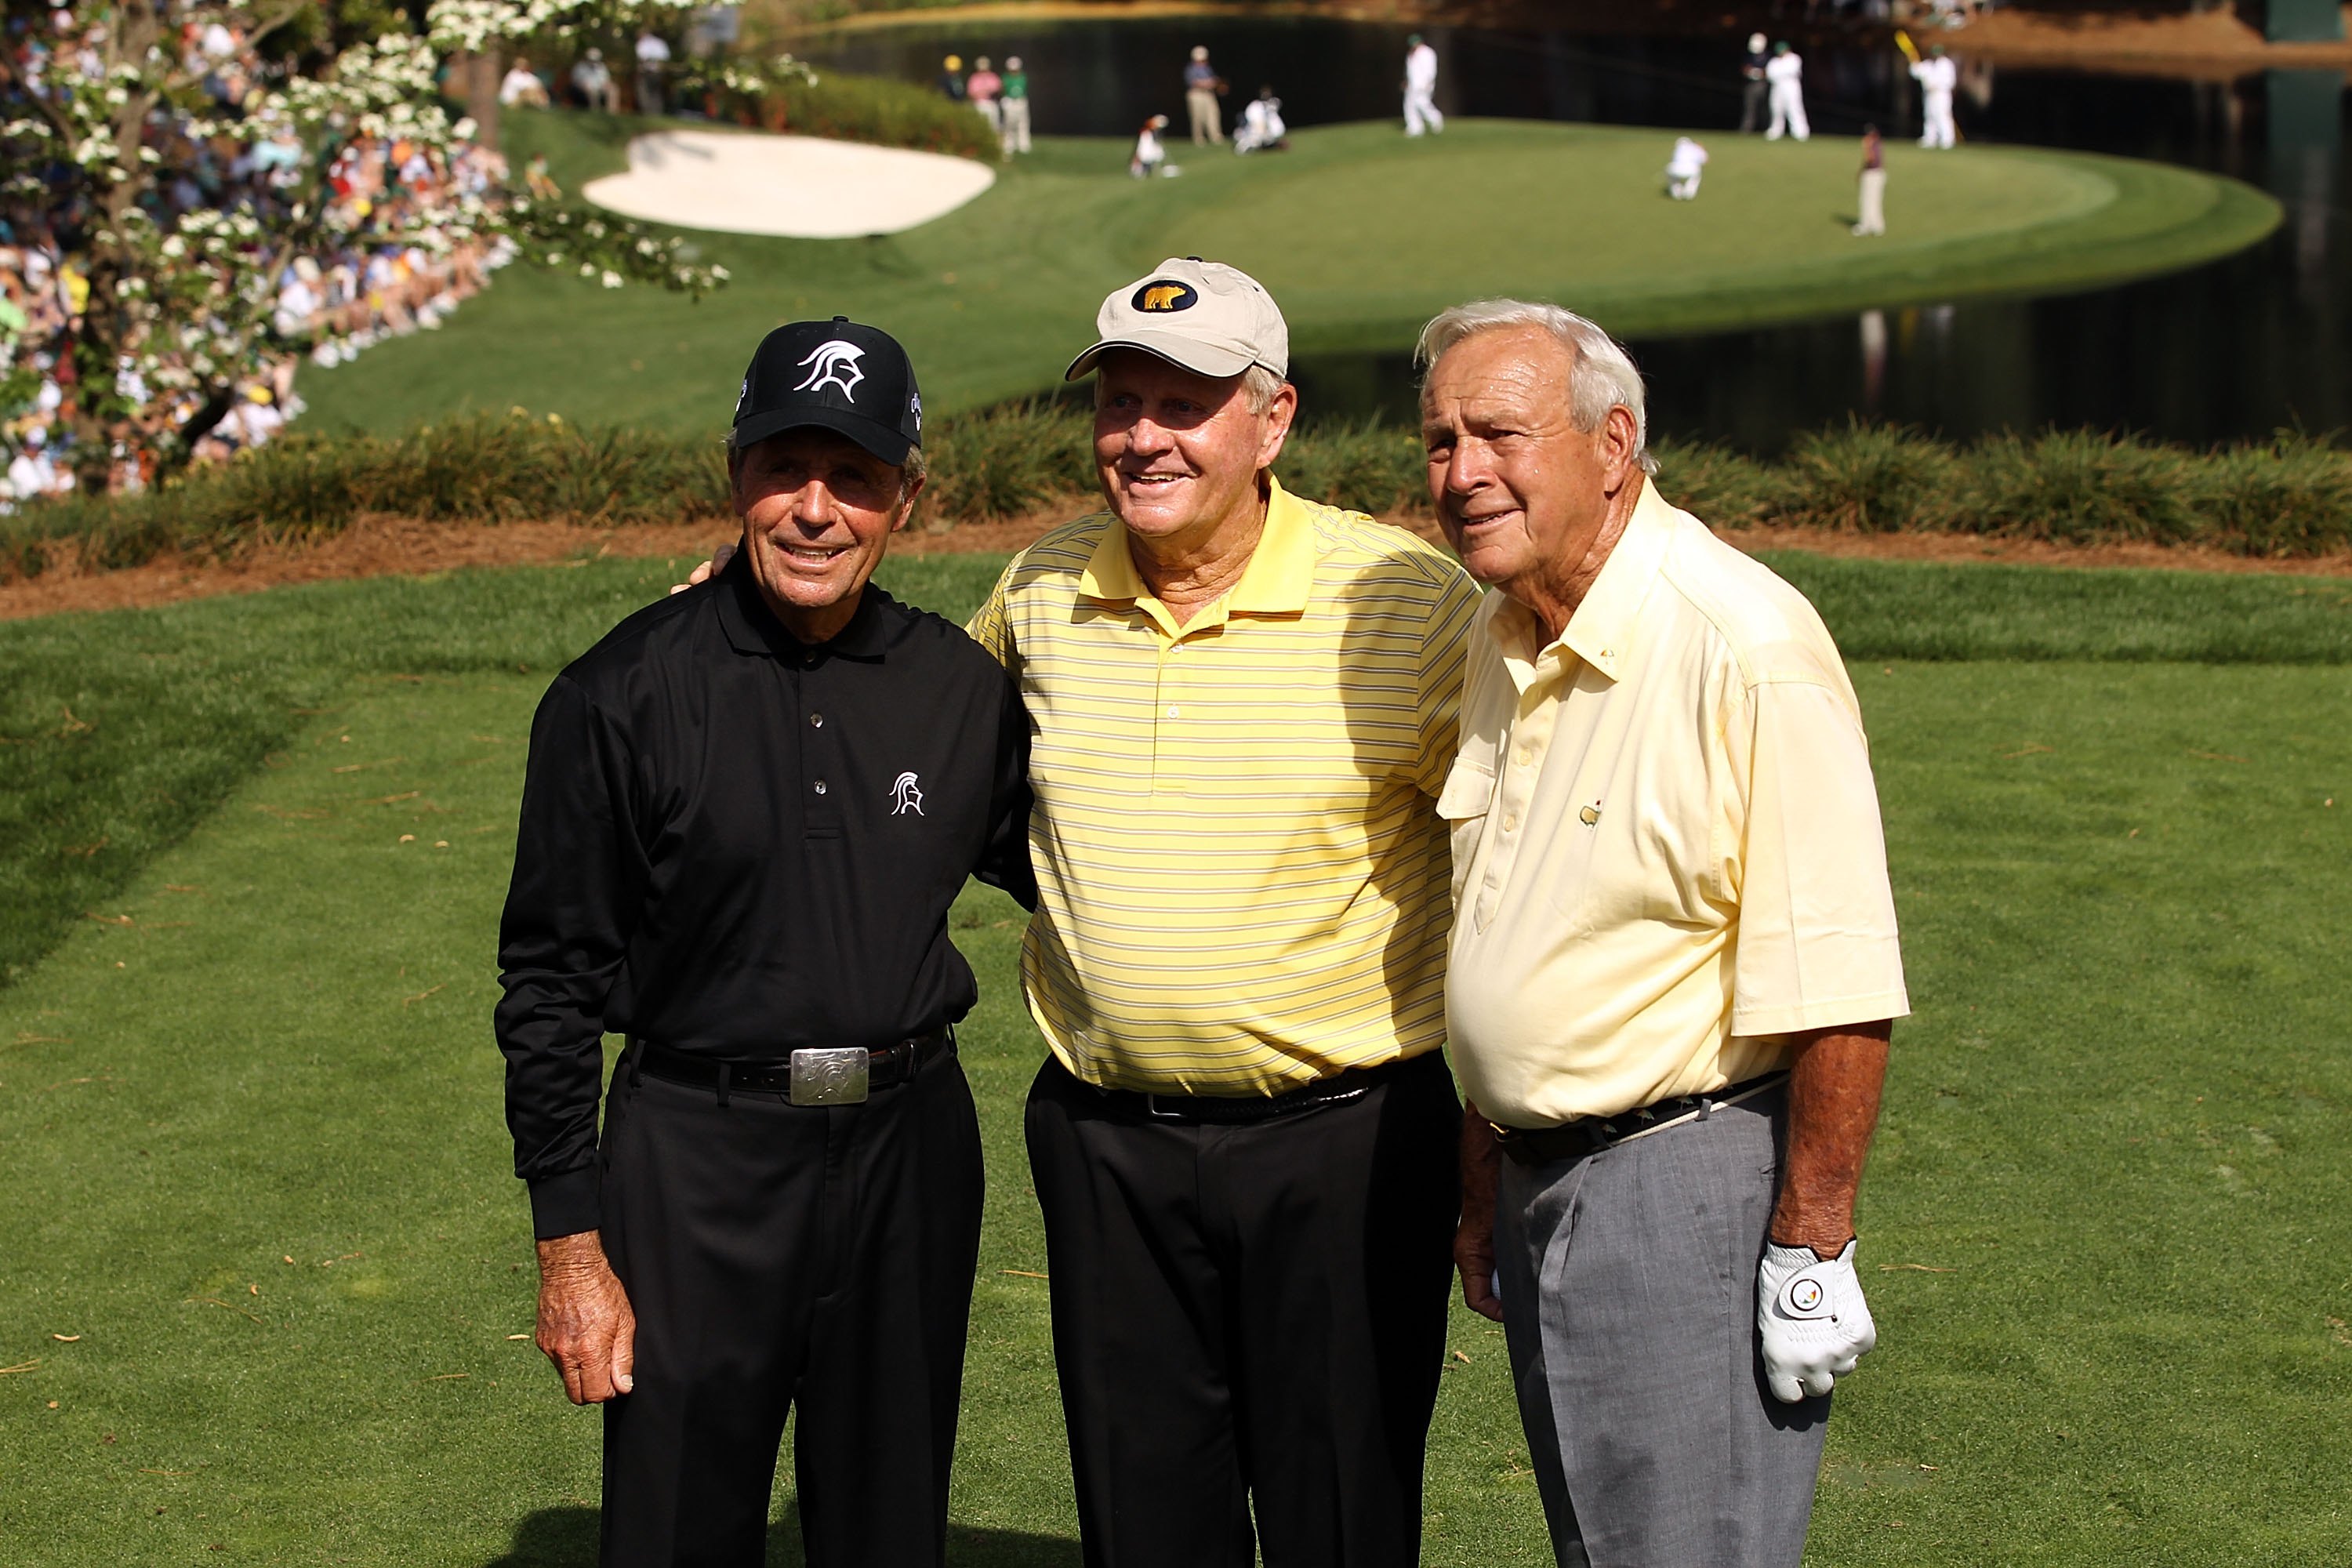 AUGUSTA, GA - APRIL 07:  Gary Player, Jack Nicklaus and Arnold Palmer during the Par 3 tournament prior to the 2010 Masters Tournament at Augusta National Golf Club on April 7, 2010 in Augusta, Georgia.  (Photo by Streeter Lecka/Getty Images for Golf Week